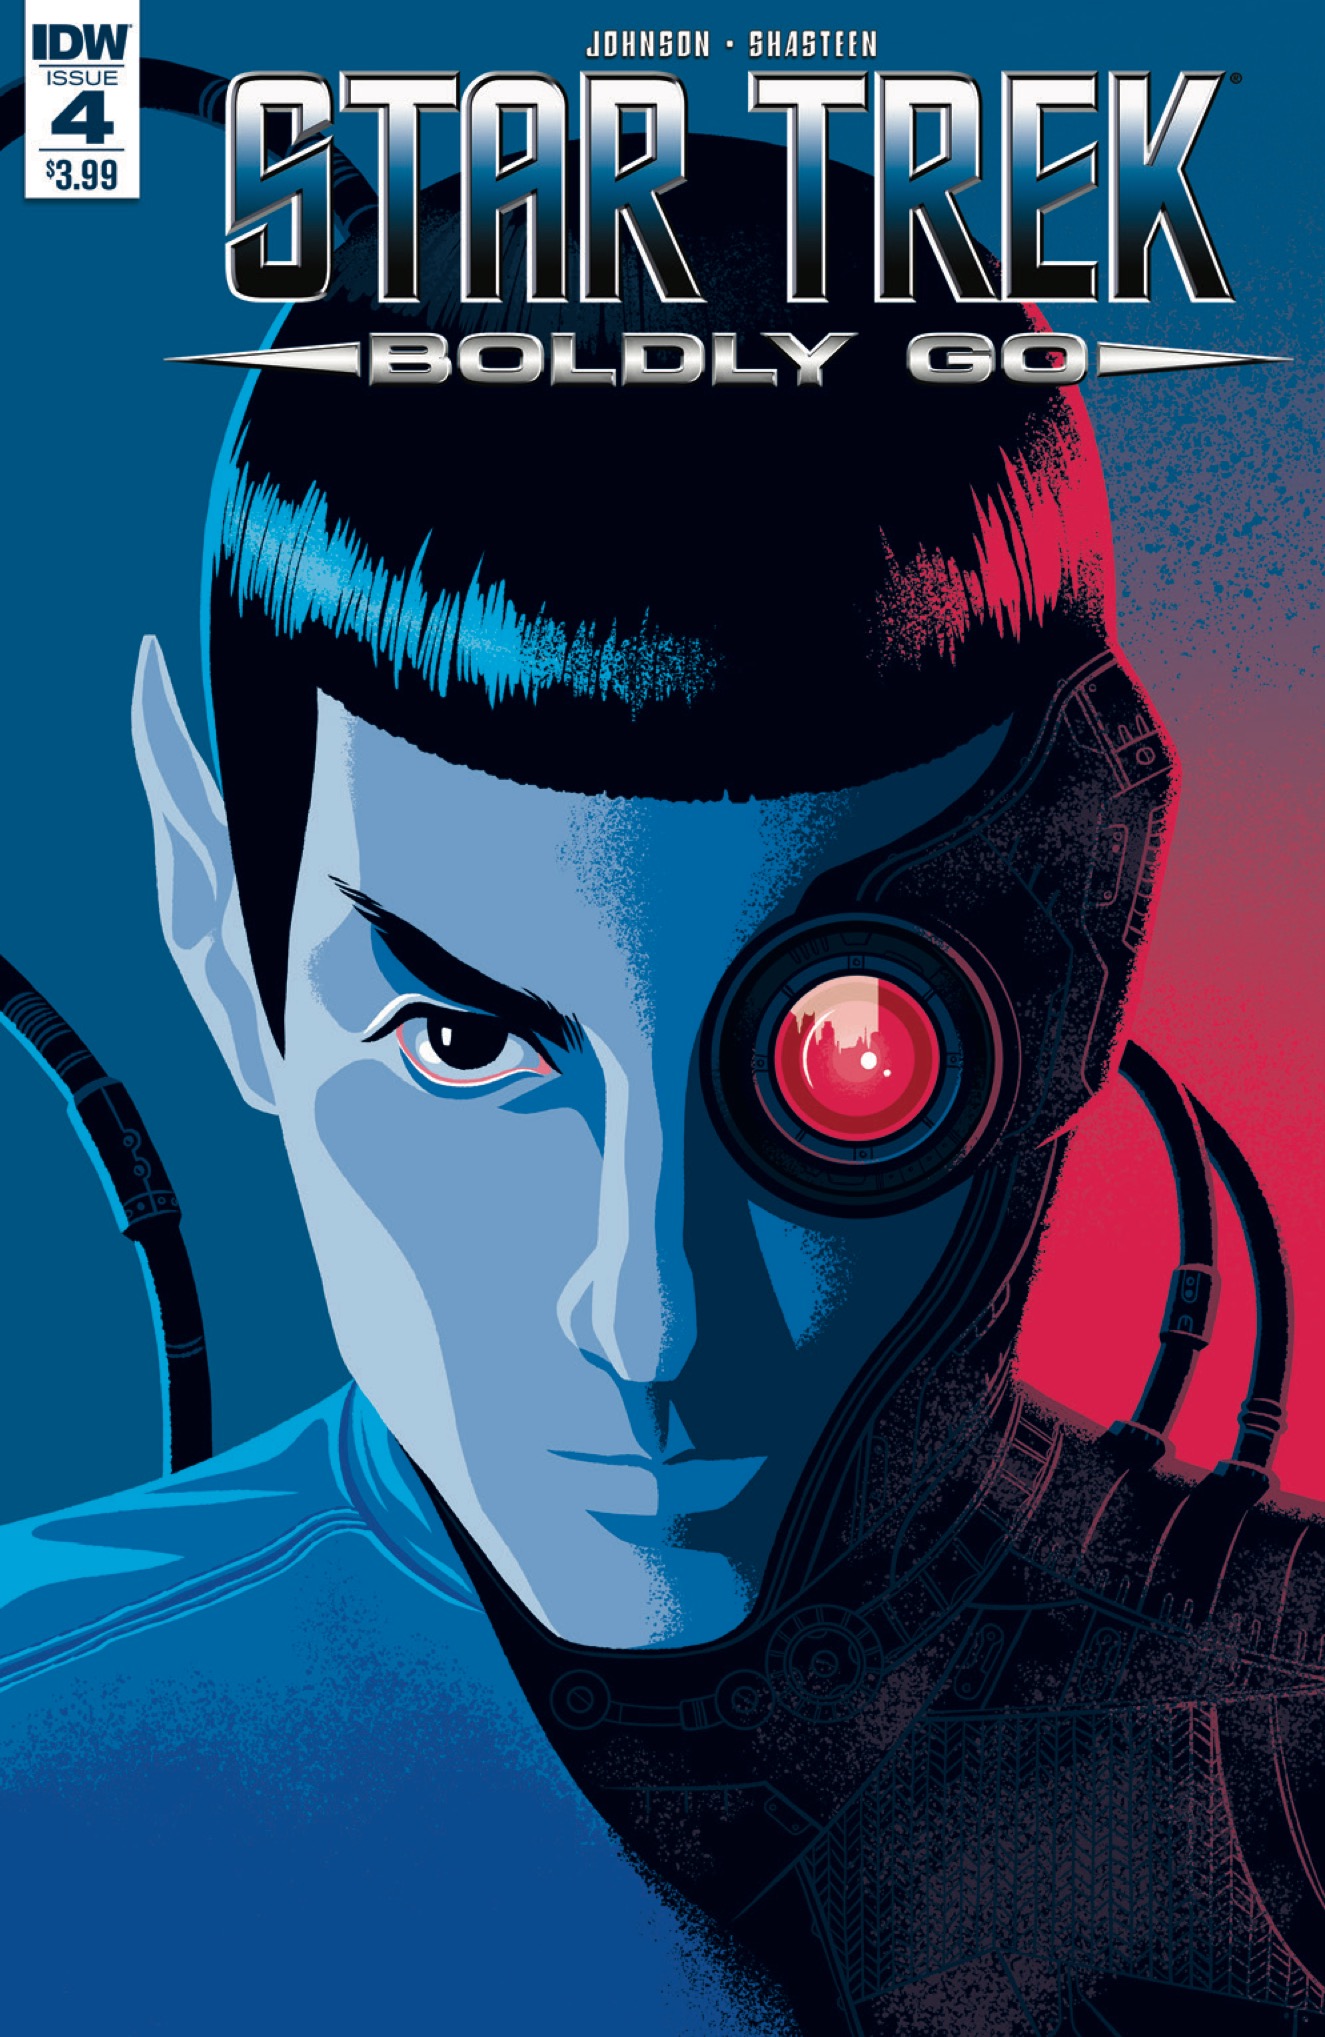 [EXCLUSIVE] IDW Preview: Star Trek: Boldly Go #4